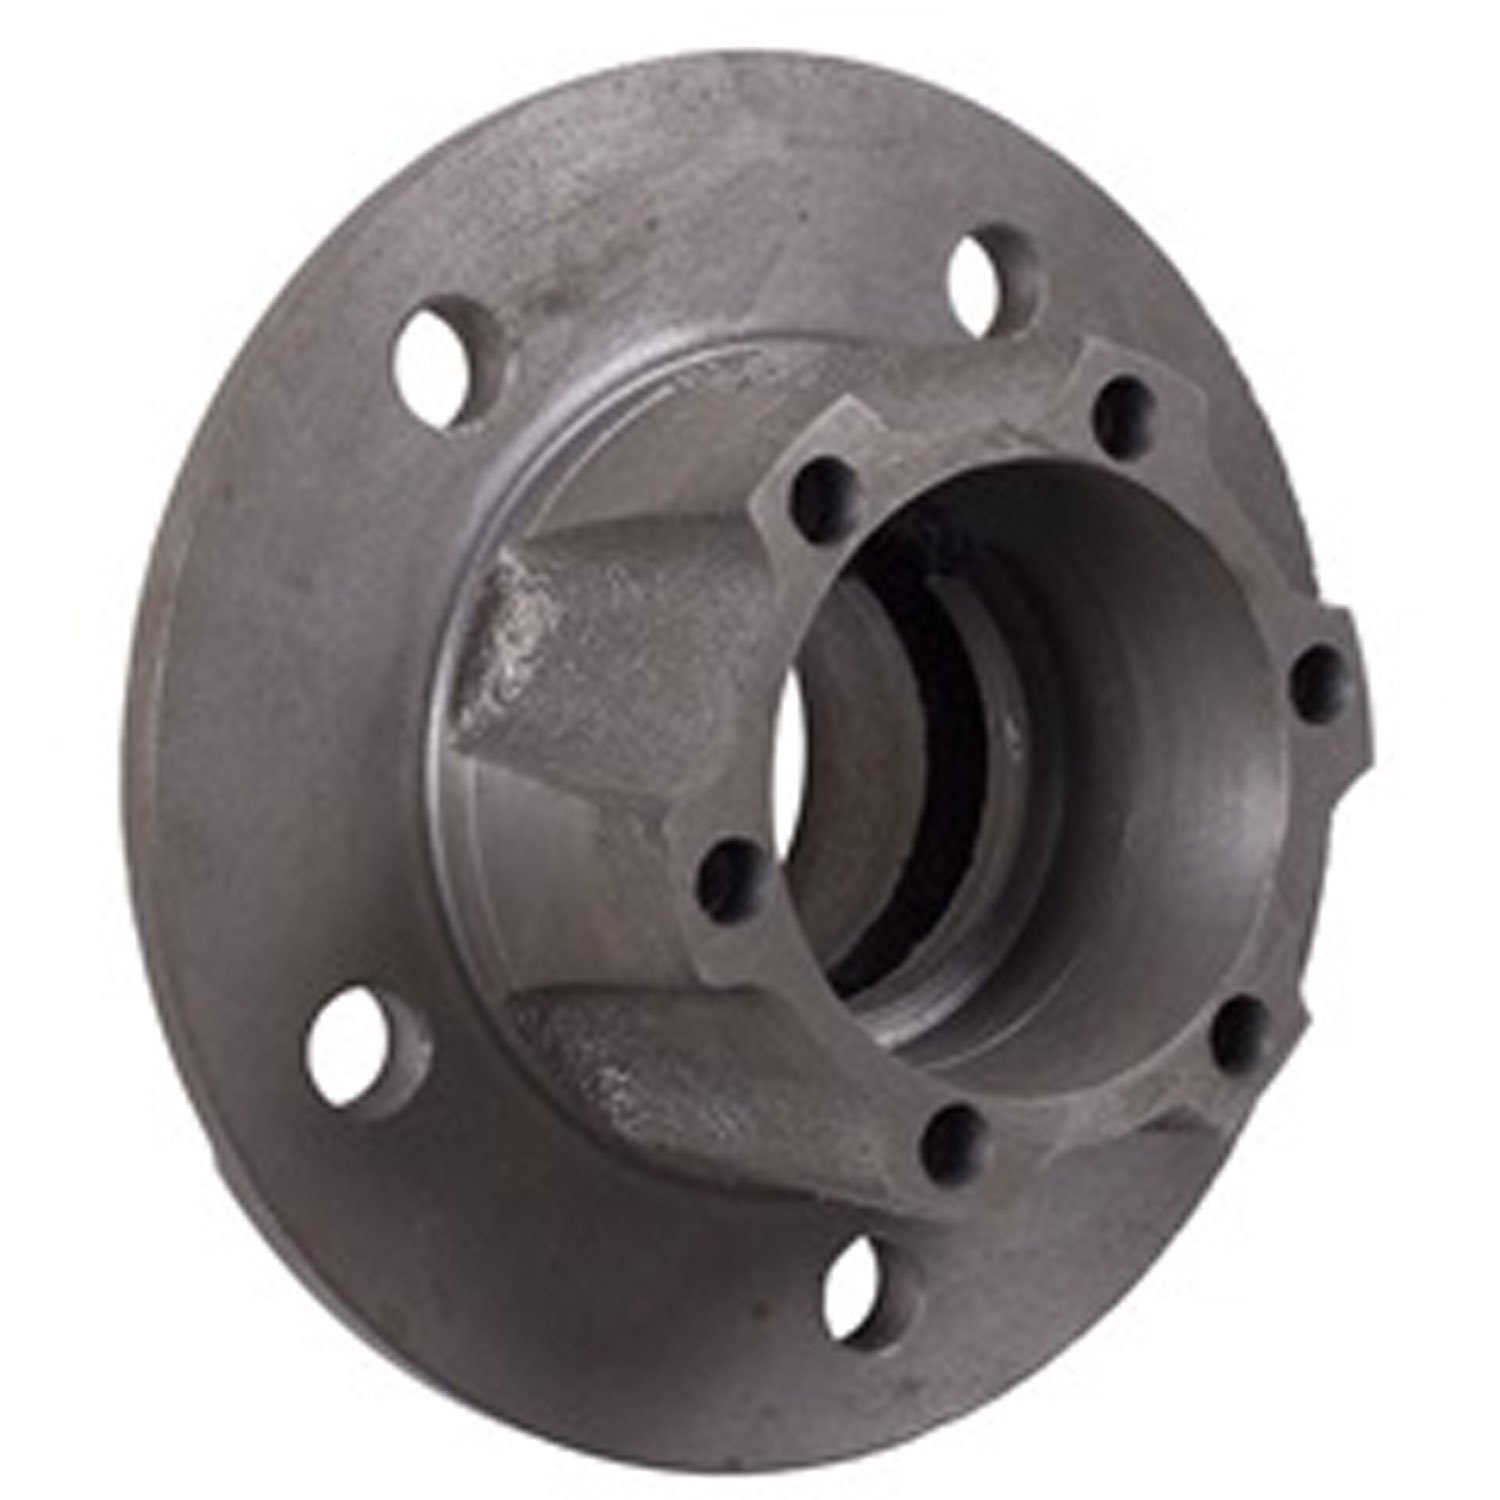 This front axle hub assembly from Omix-ADA fits 66-81 CJ5 66-75 CJ6 and 76-81 CJ7 with 6 bolt manual